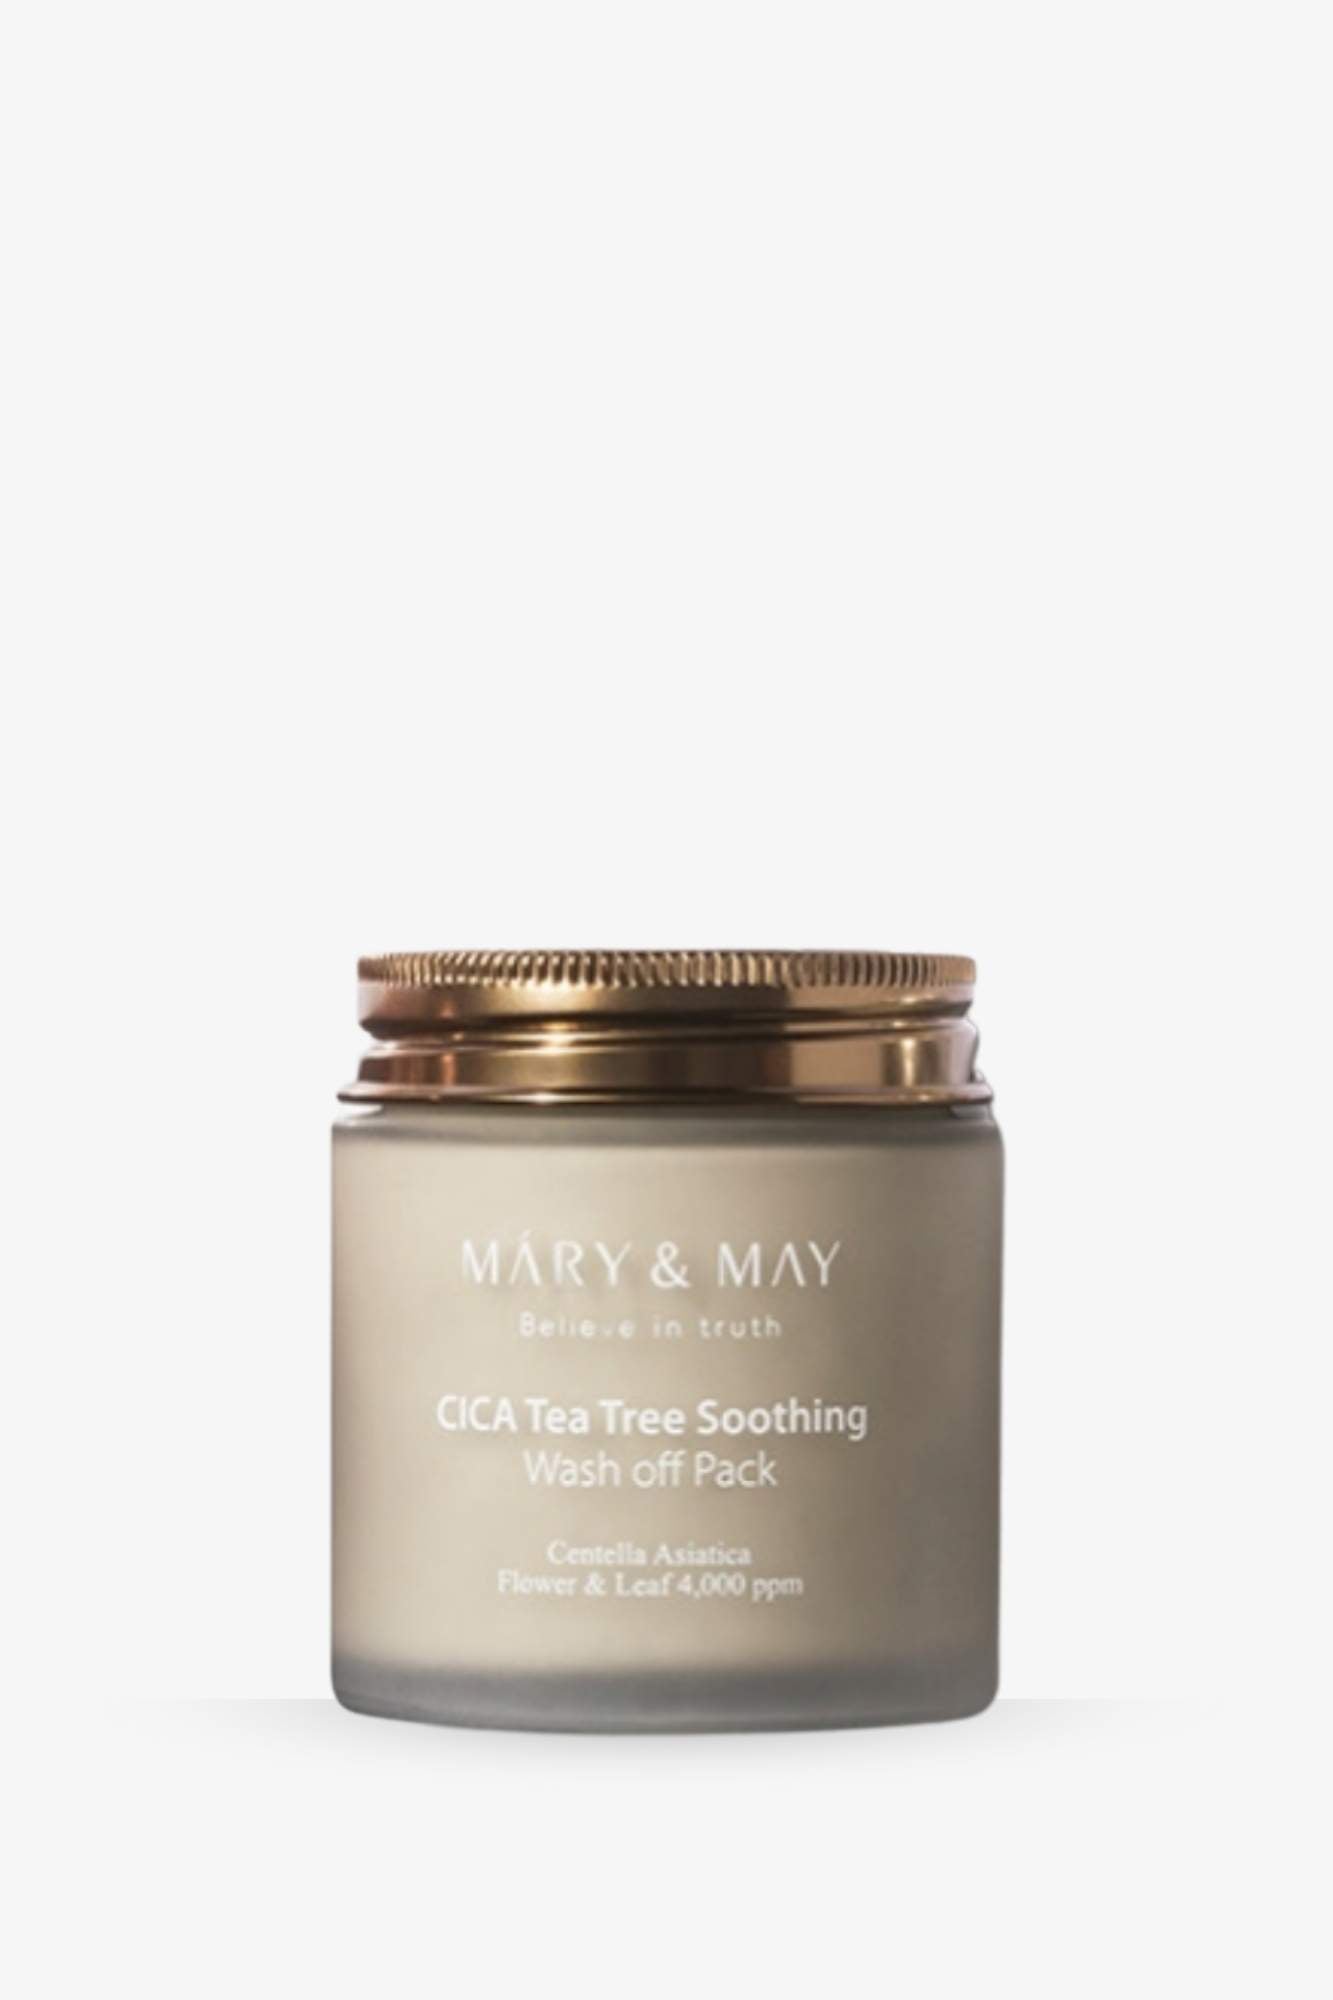 Mary & May - Cica Tea Tree Soothing Wash Off Pack - 30g / 125g